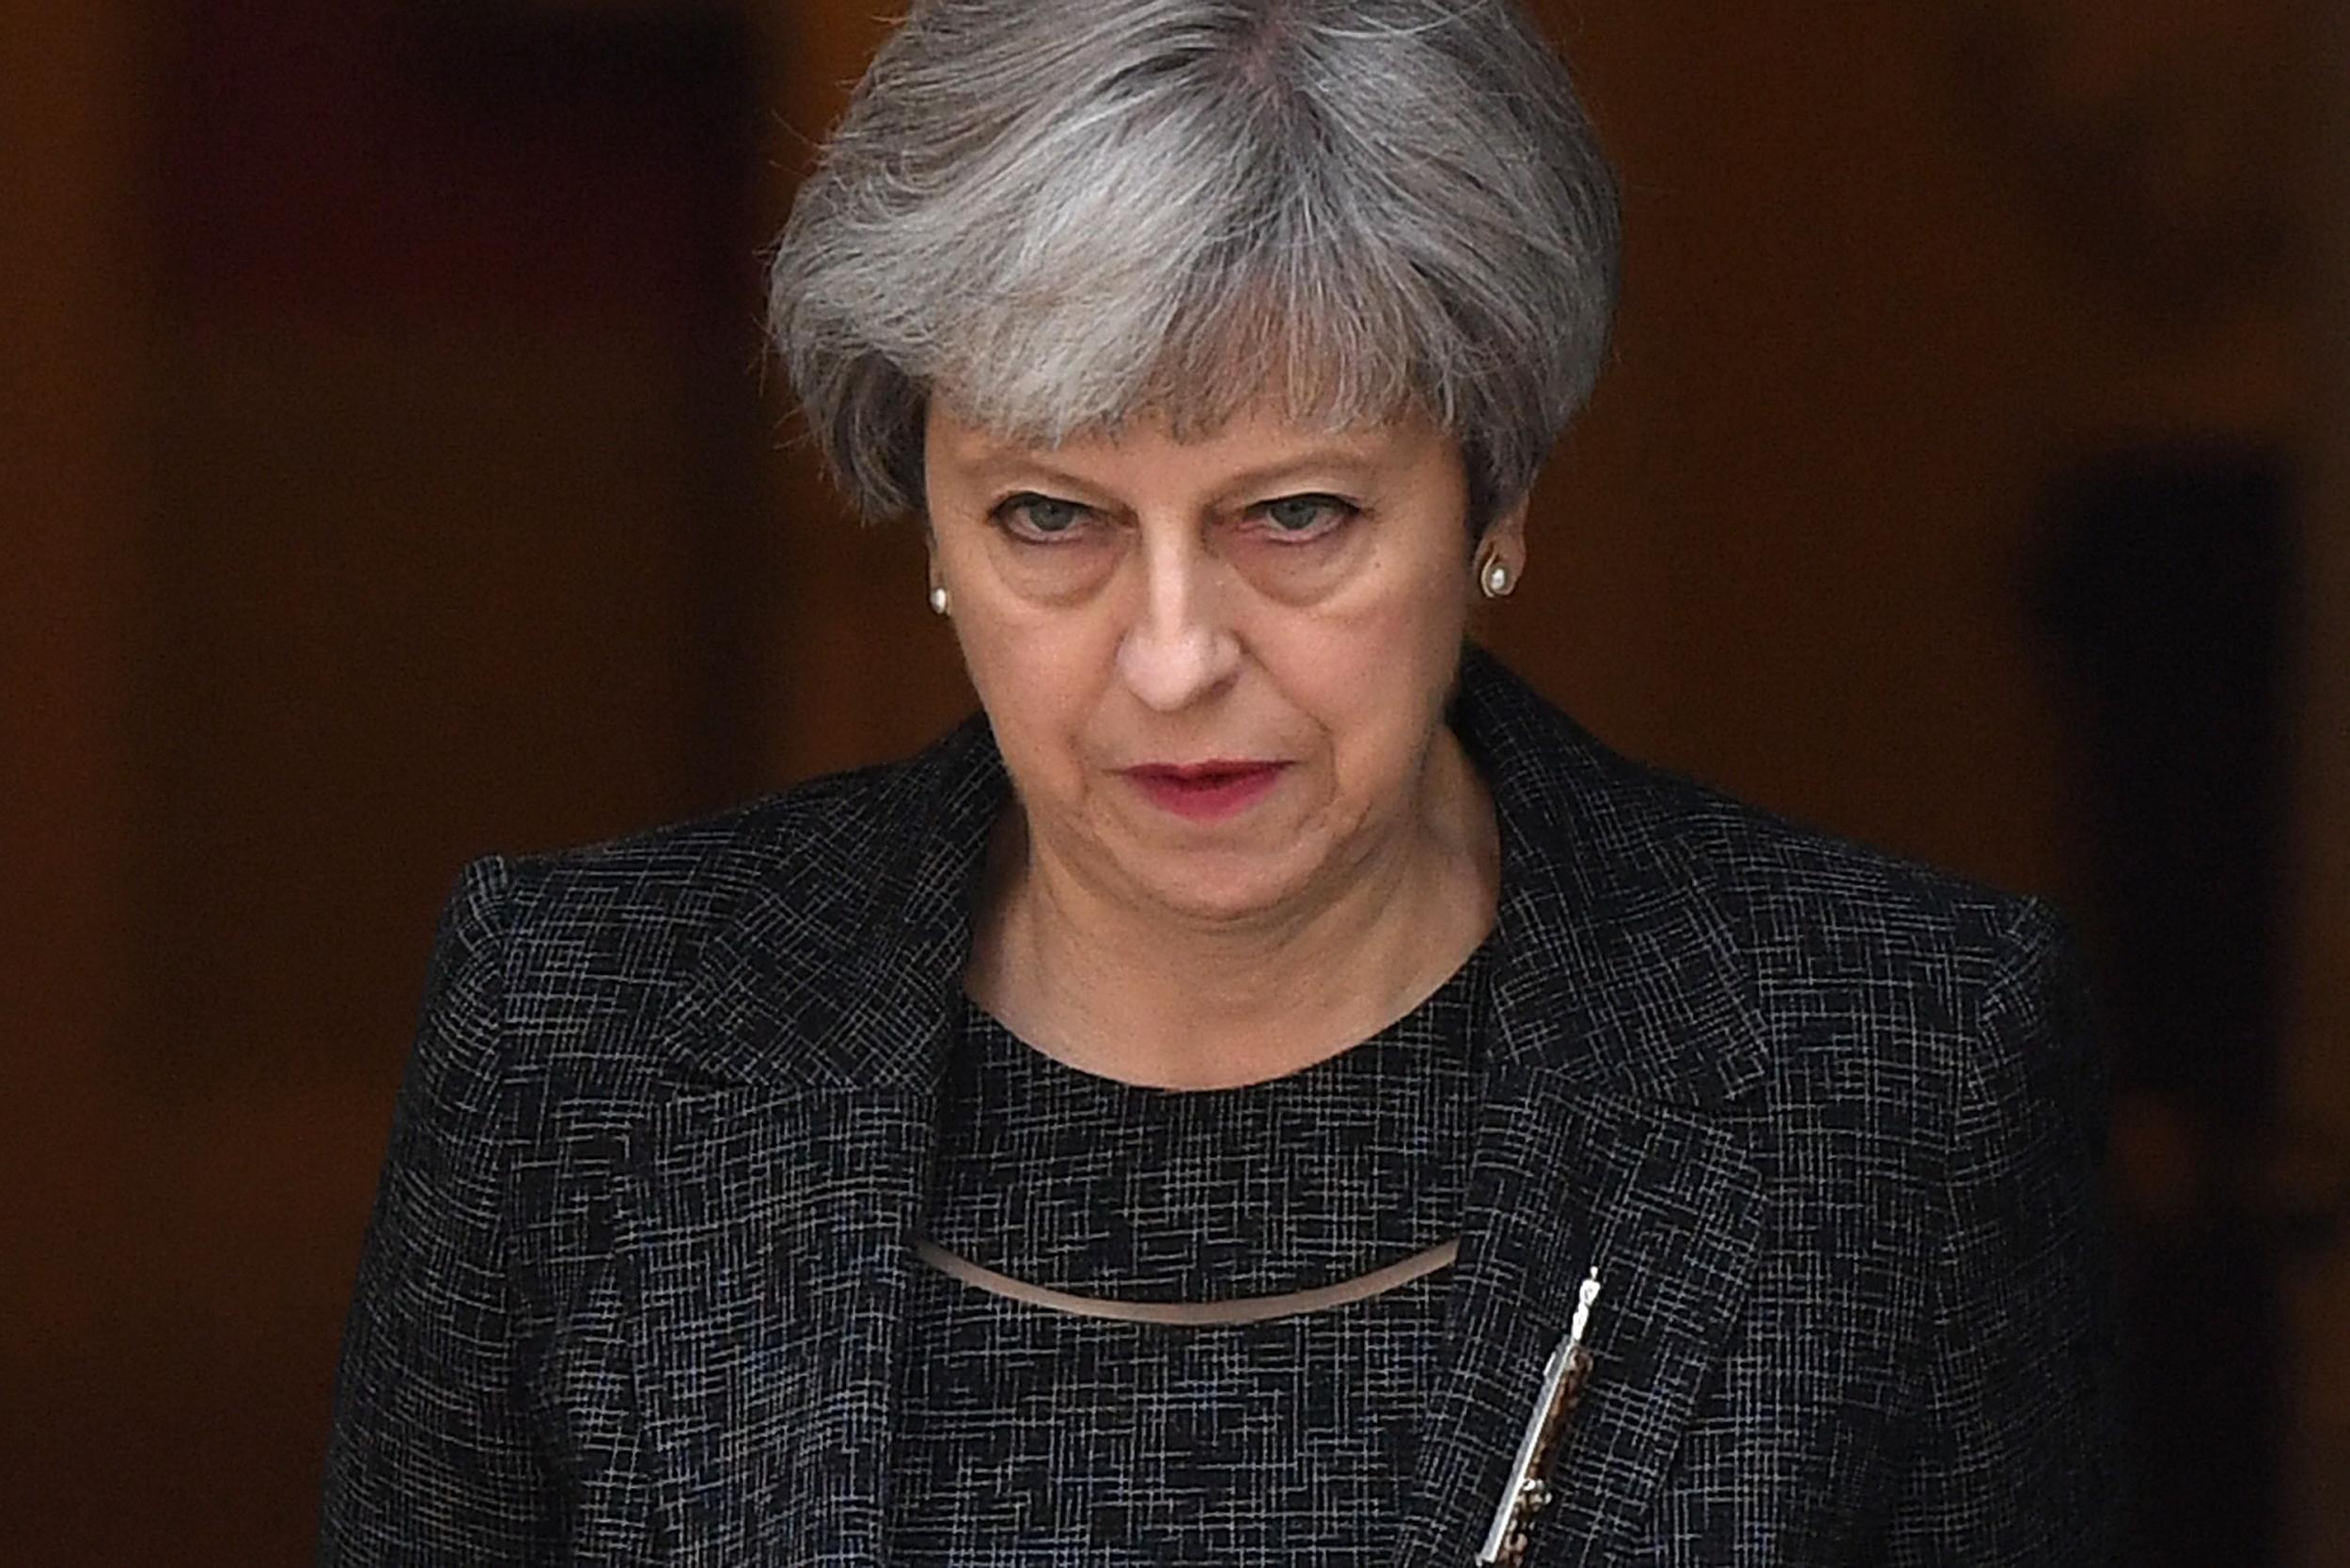 Theresa May is pushing ahead with a Queen's Speech though a deal with the DUP is yet to be finalised